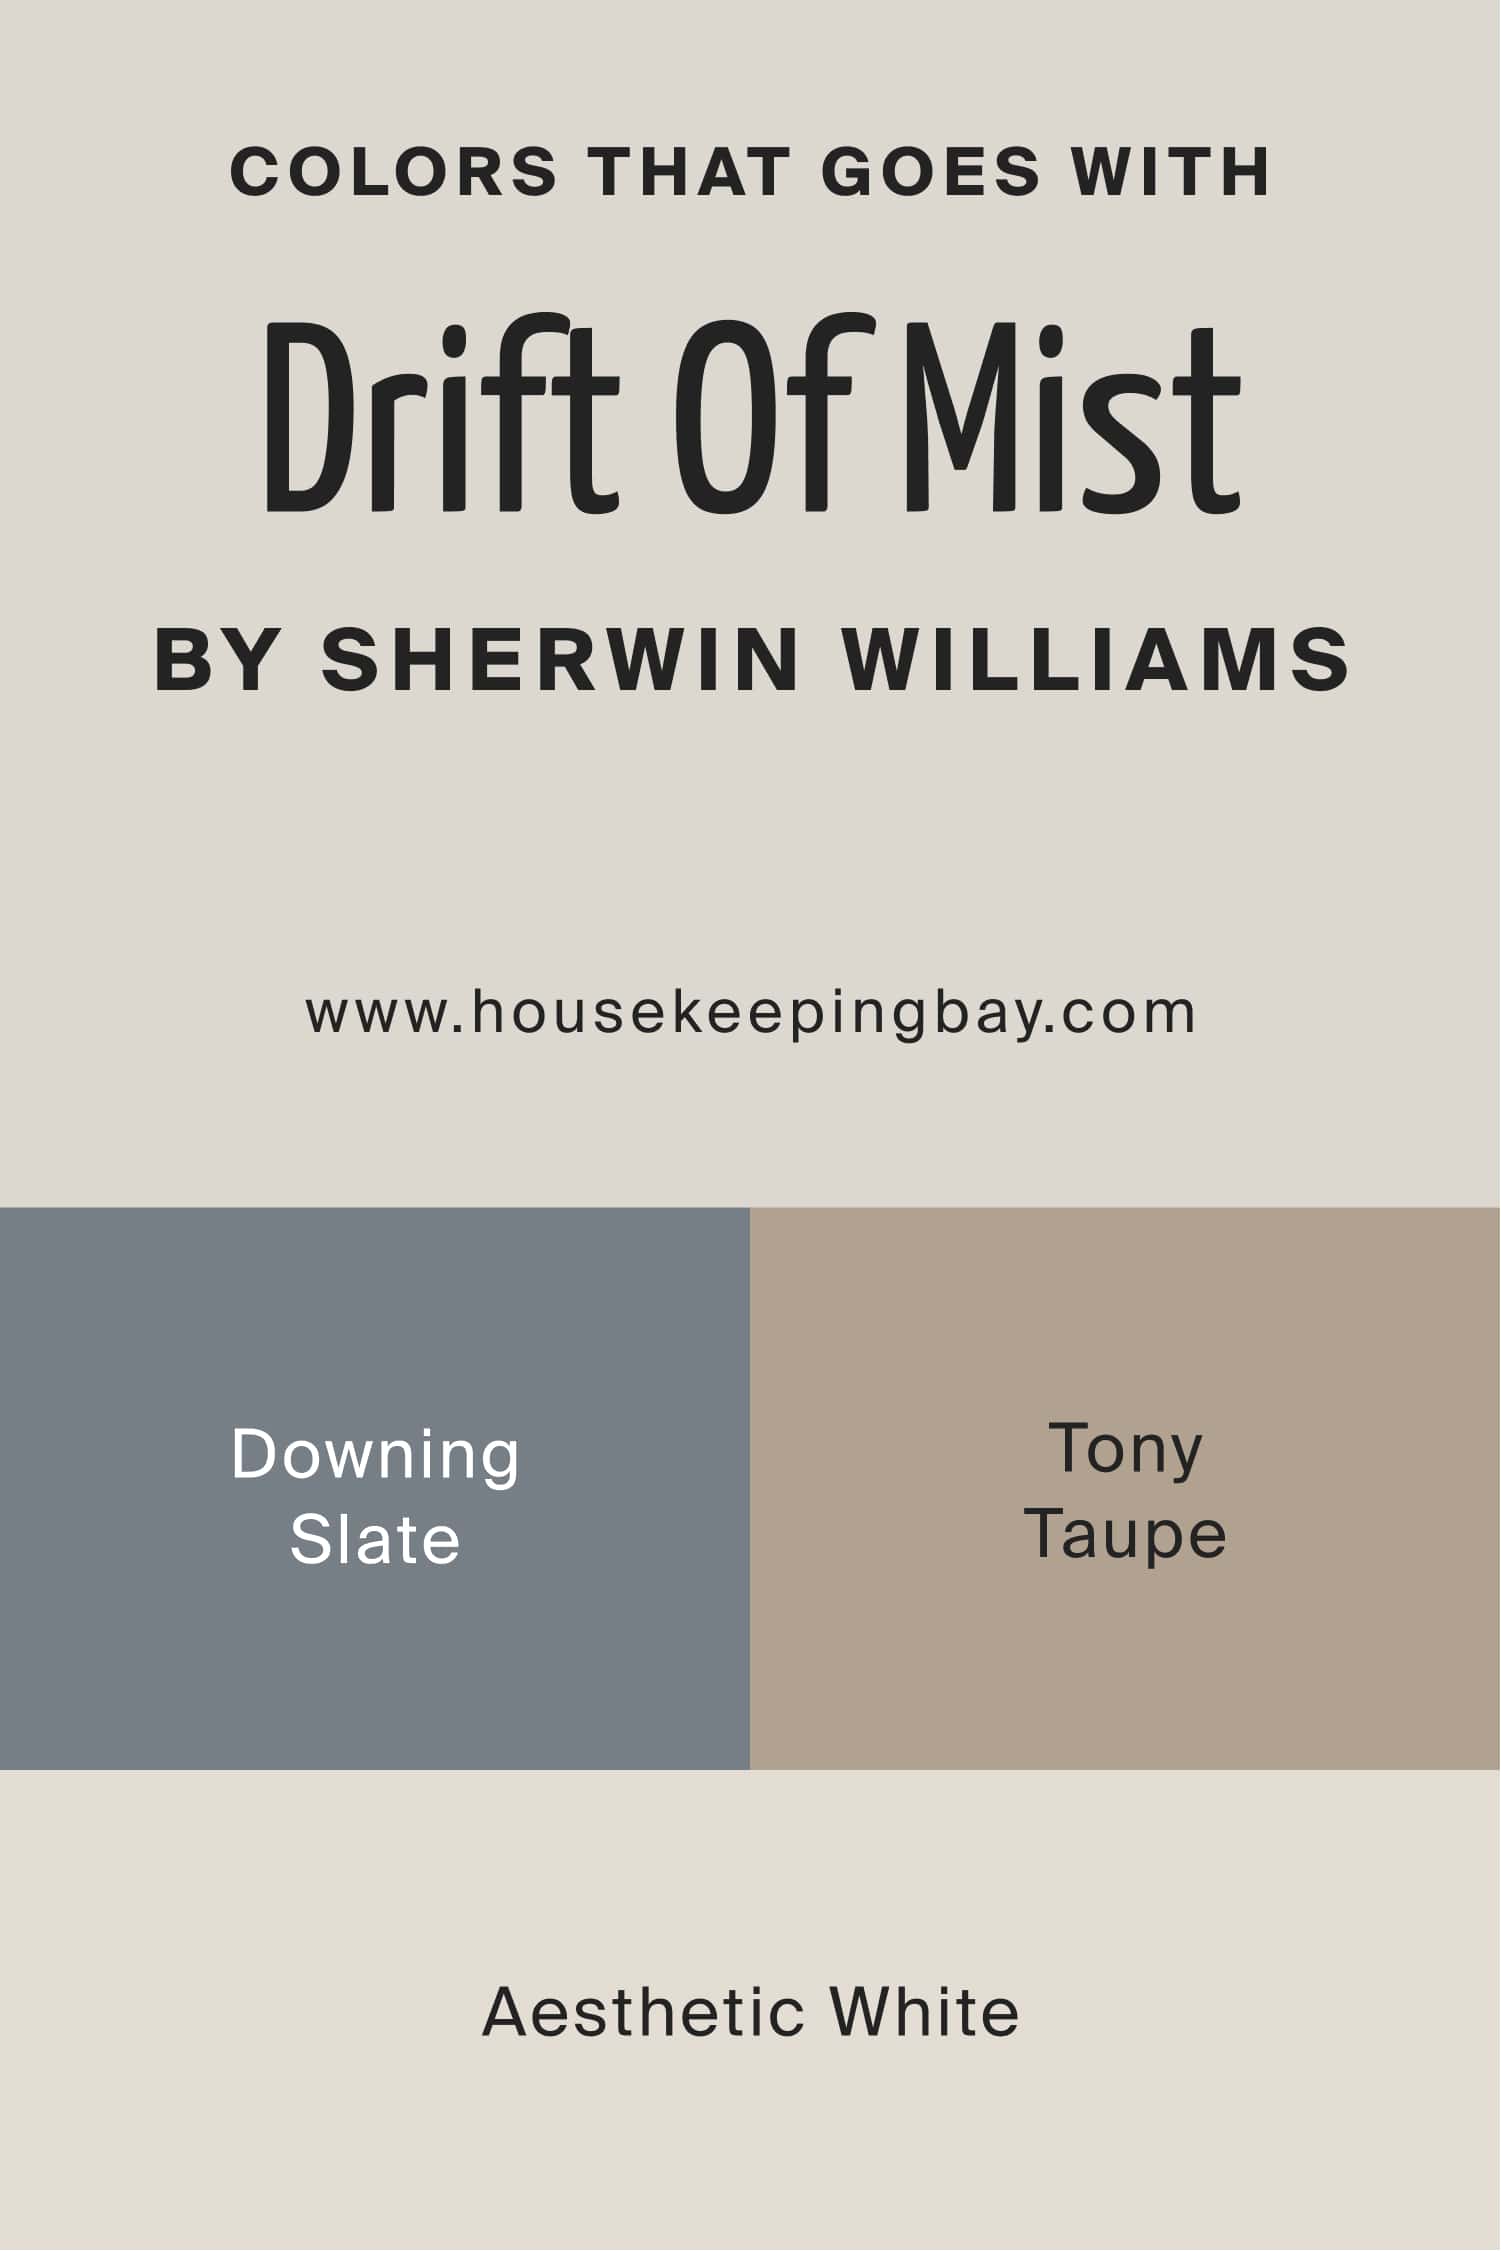 Colors that goes with Drift Of Mist by Sherwin Williams